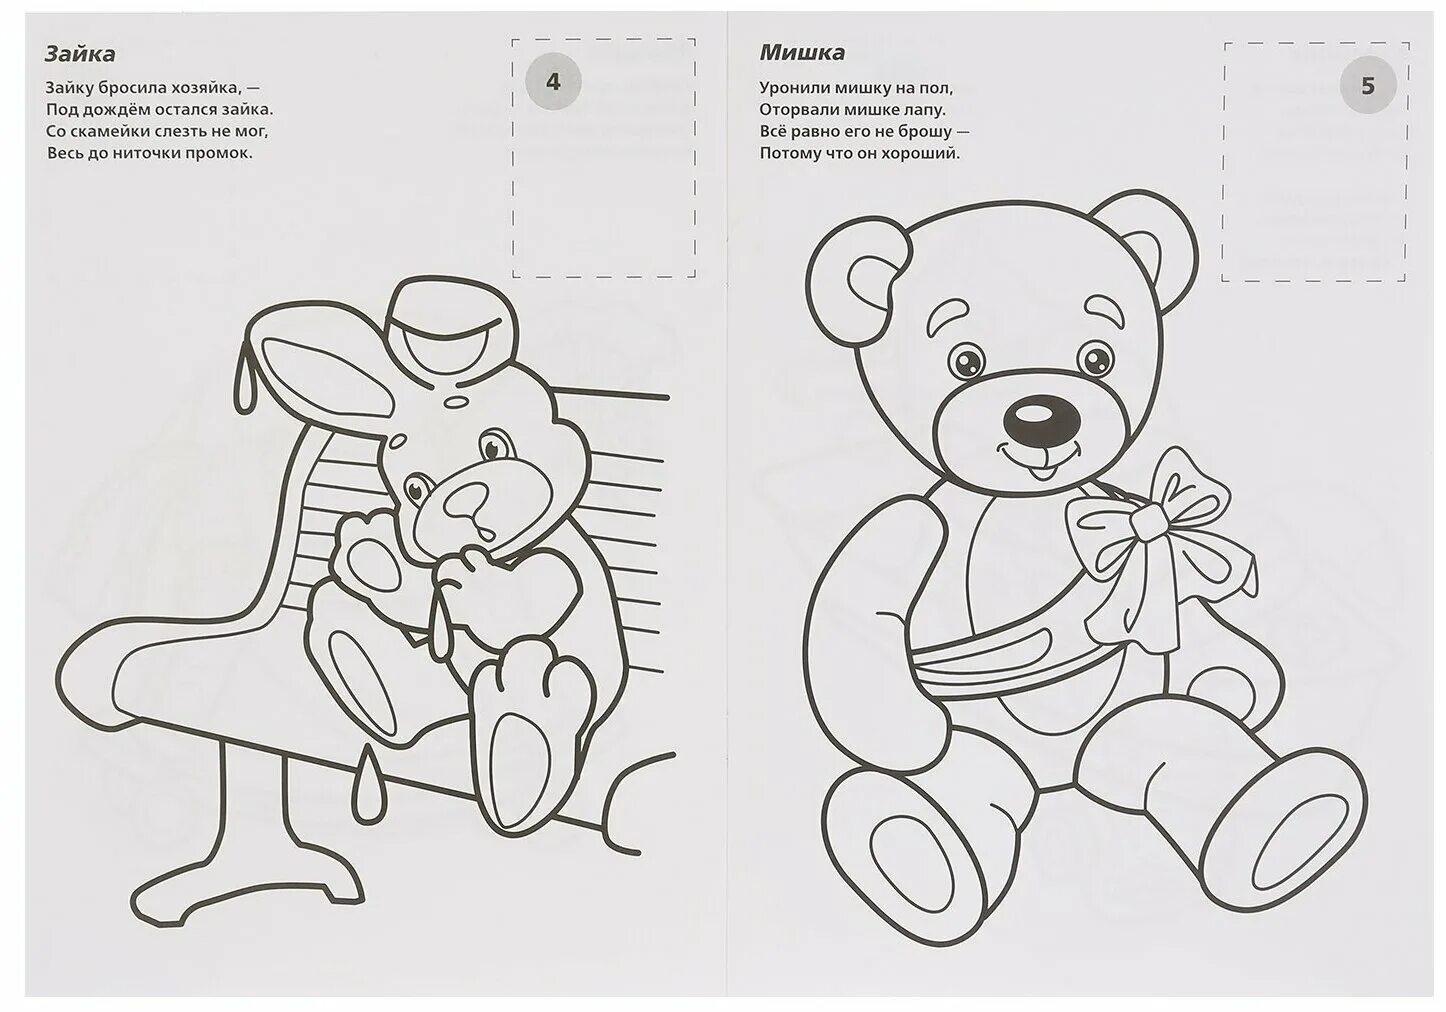 Funny underrated rabbit coloring book